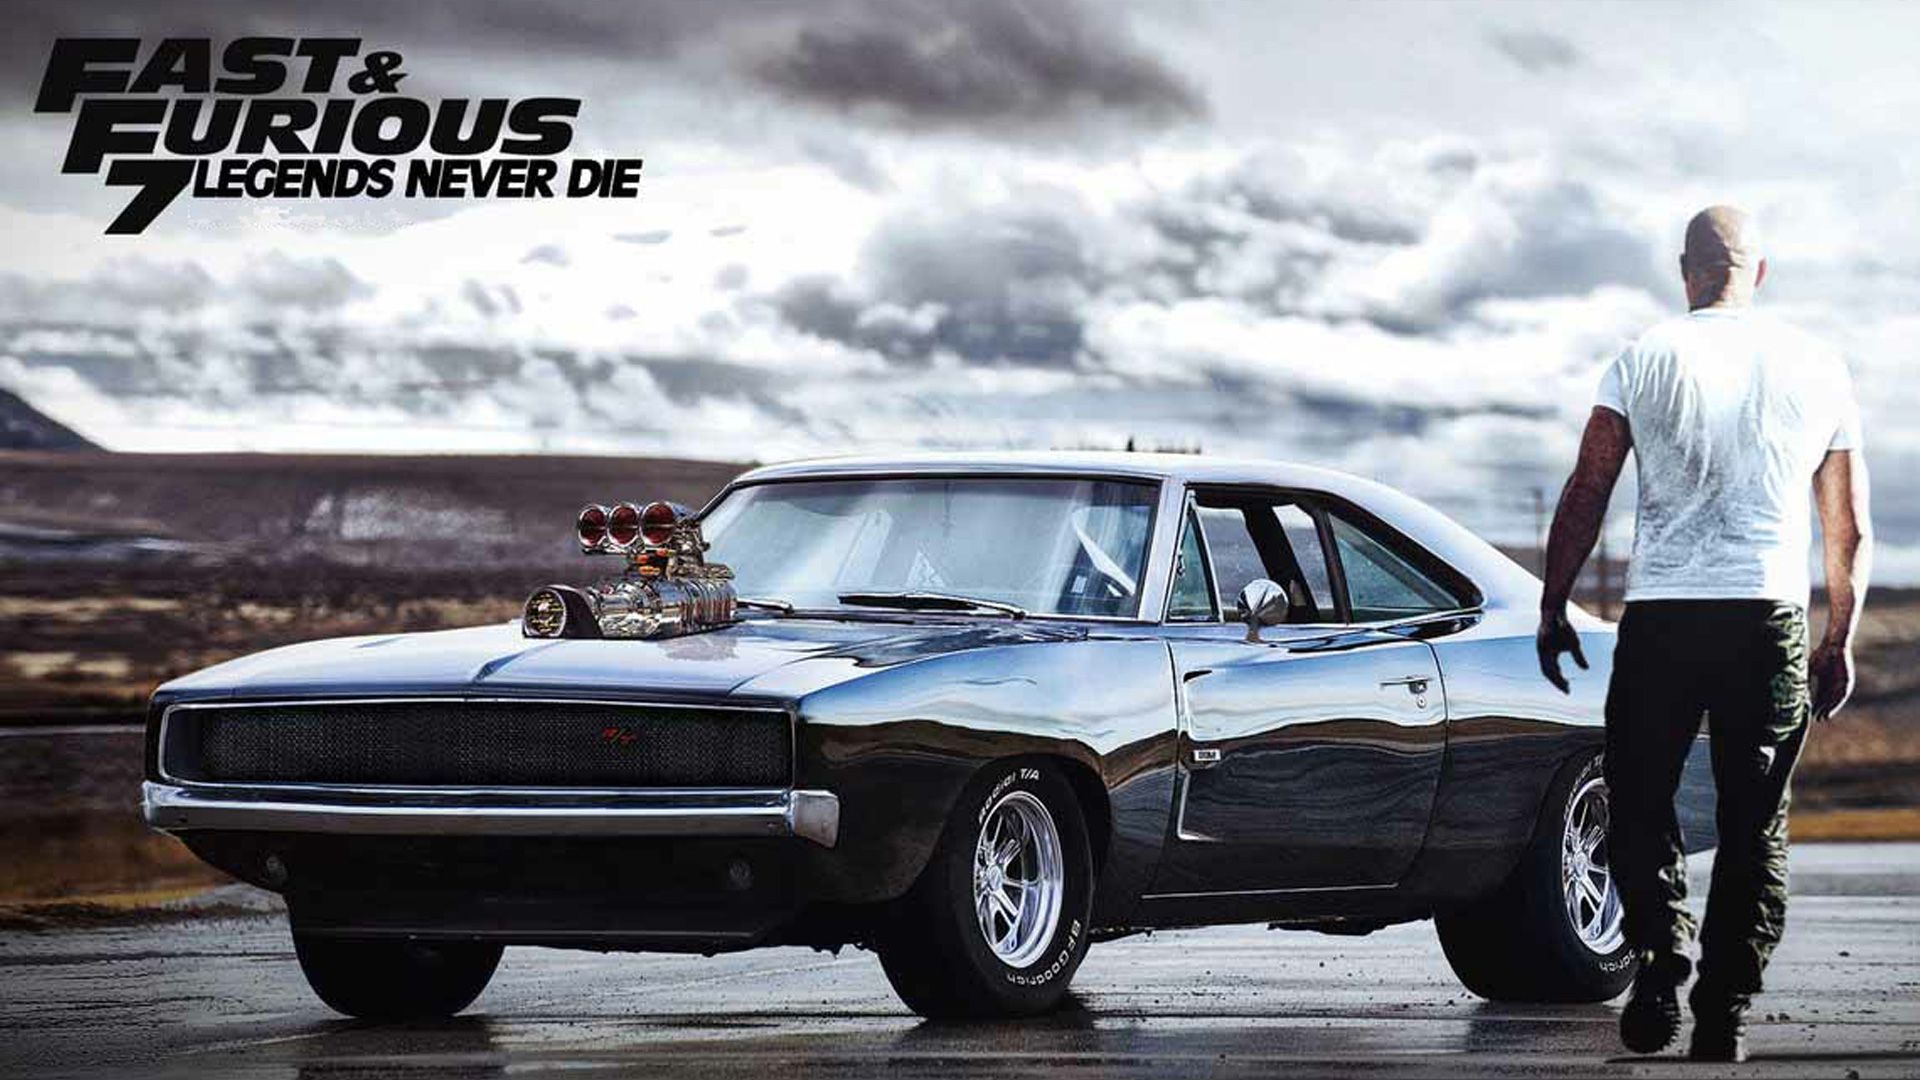 Fast and Furious. Cars movie, Fast and furious, Muscle cars